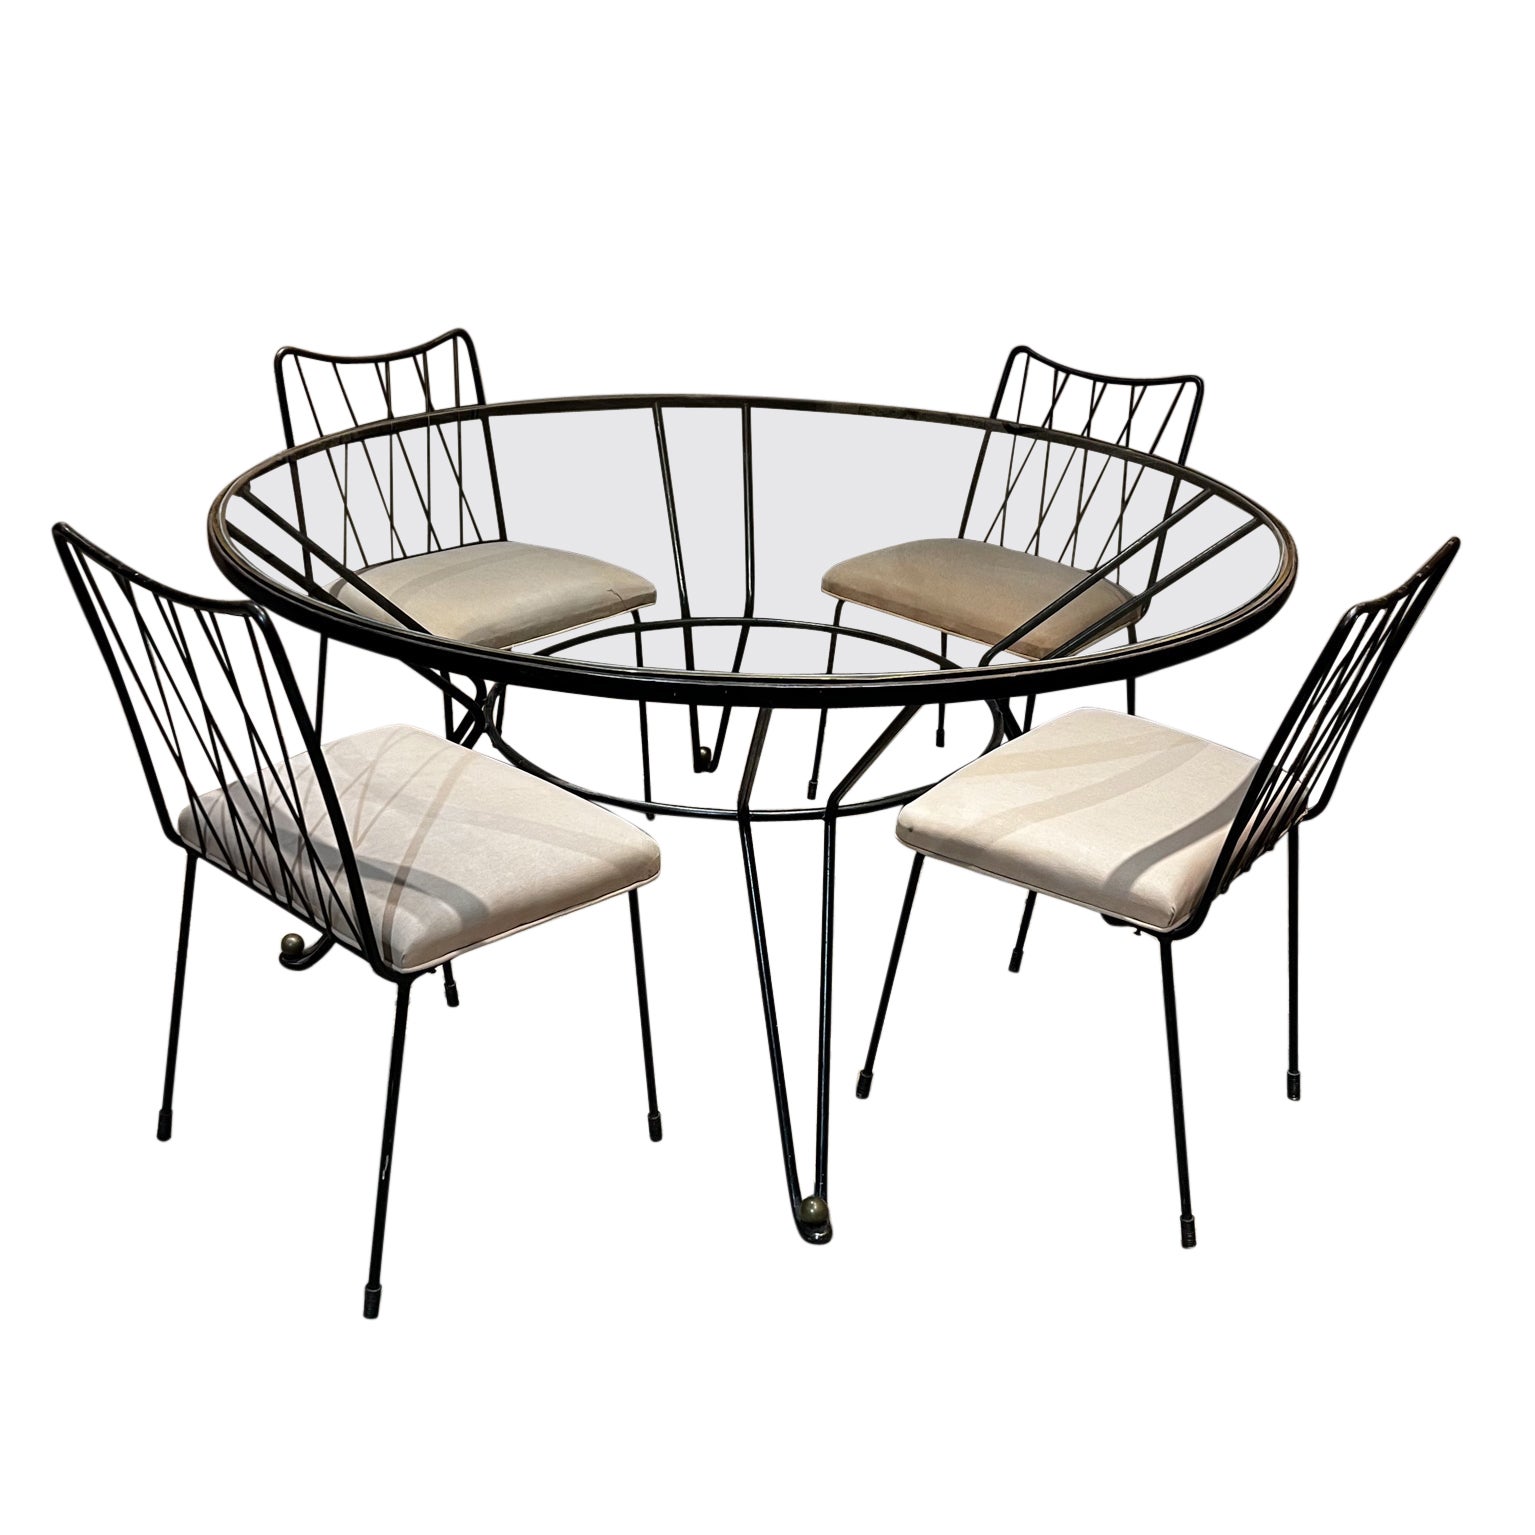 1950s French Inspired Bronze Iron Dining Table Set Six Chairs Arturo Pani 